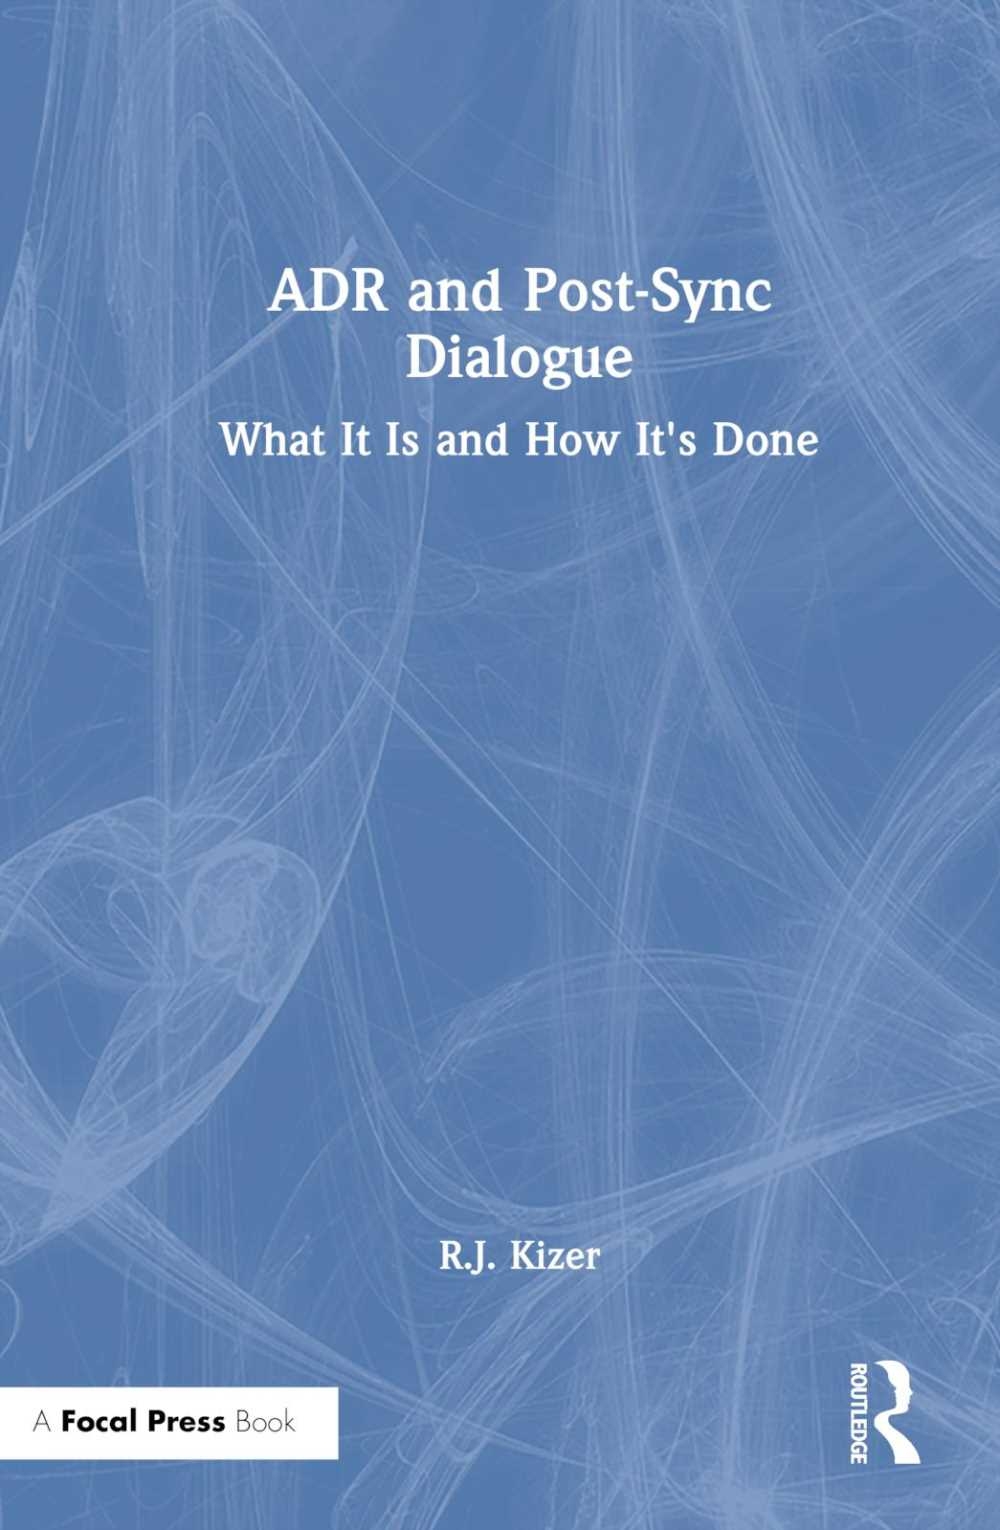 Adr and Post-Sync Dialogue: What It Is and How It’s Done